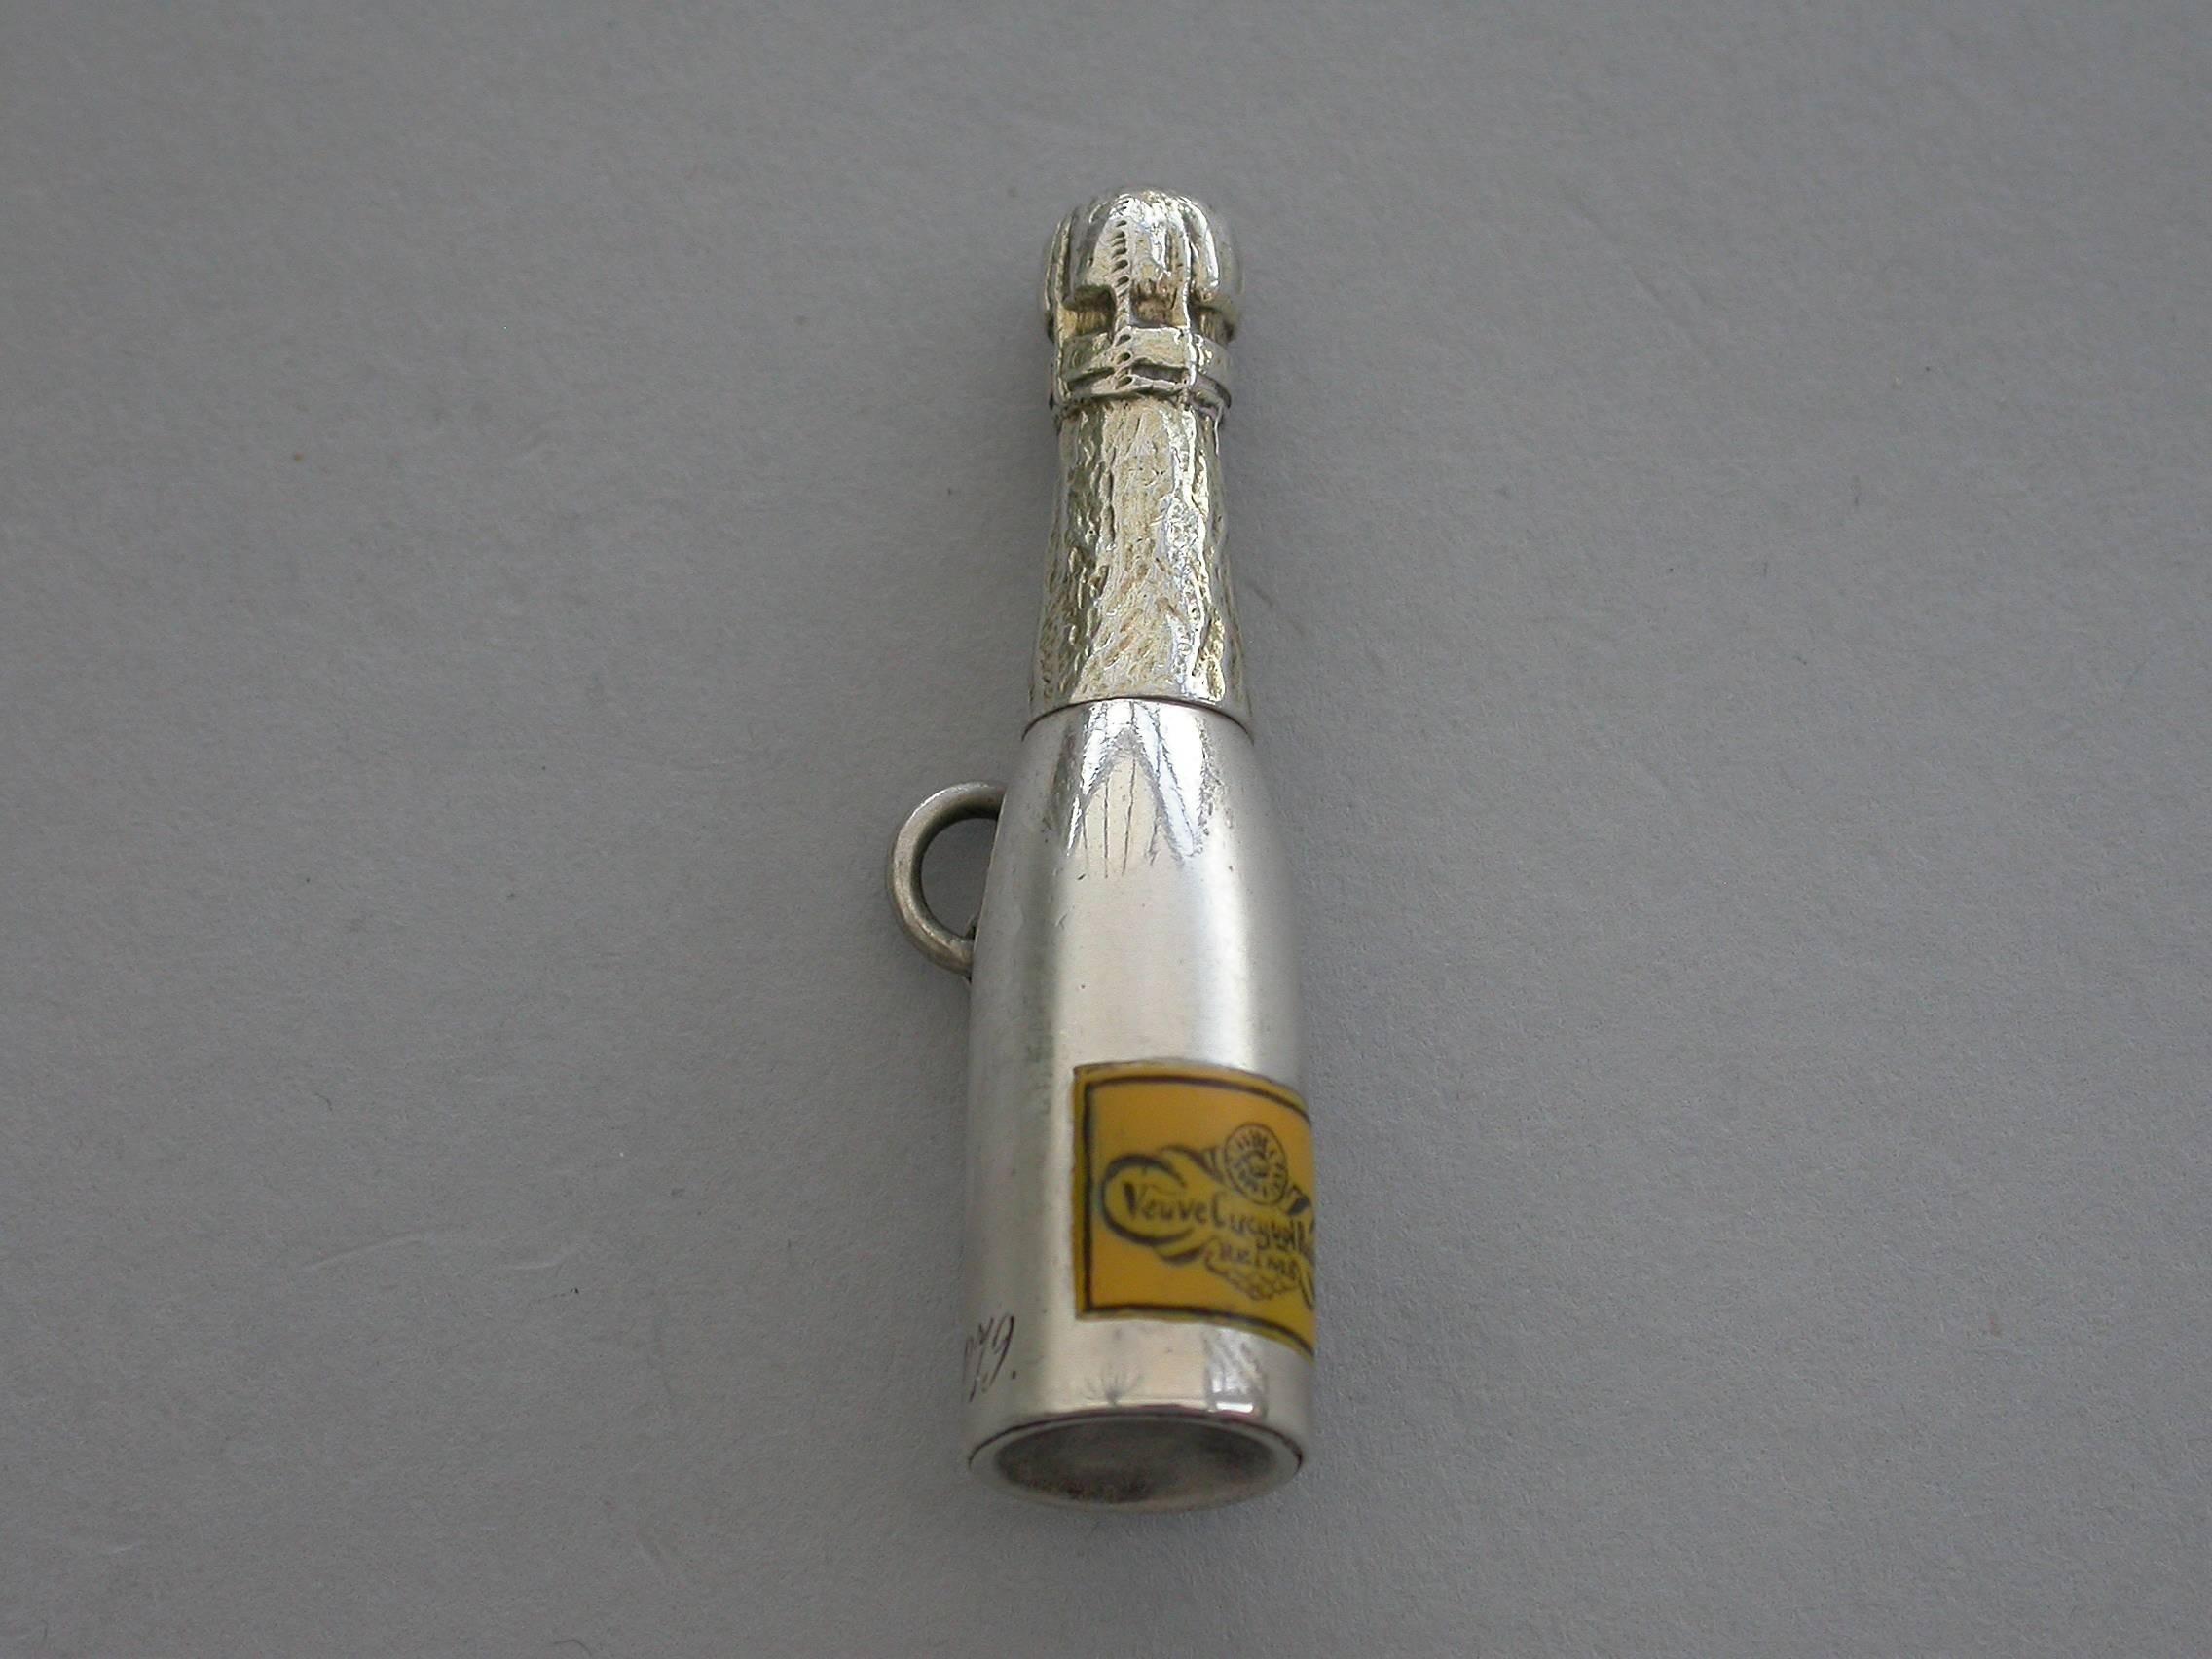 A good Victorian novelty silver and enamel telescopic propelling pencil made in the form of a champagne bottle, with distinctive yellow enamel label for Veuve Clicquot Ponsardin Champagne, Reims.

By Sampson Mordan & Co, circa 1880

Measures: